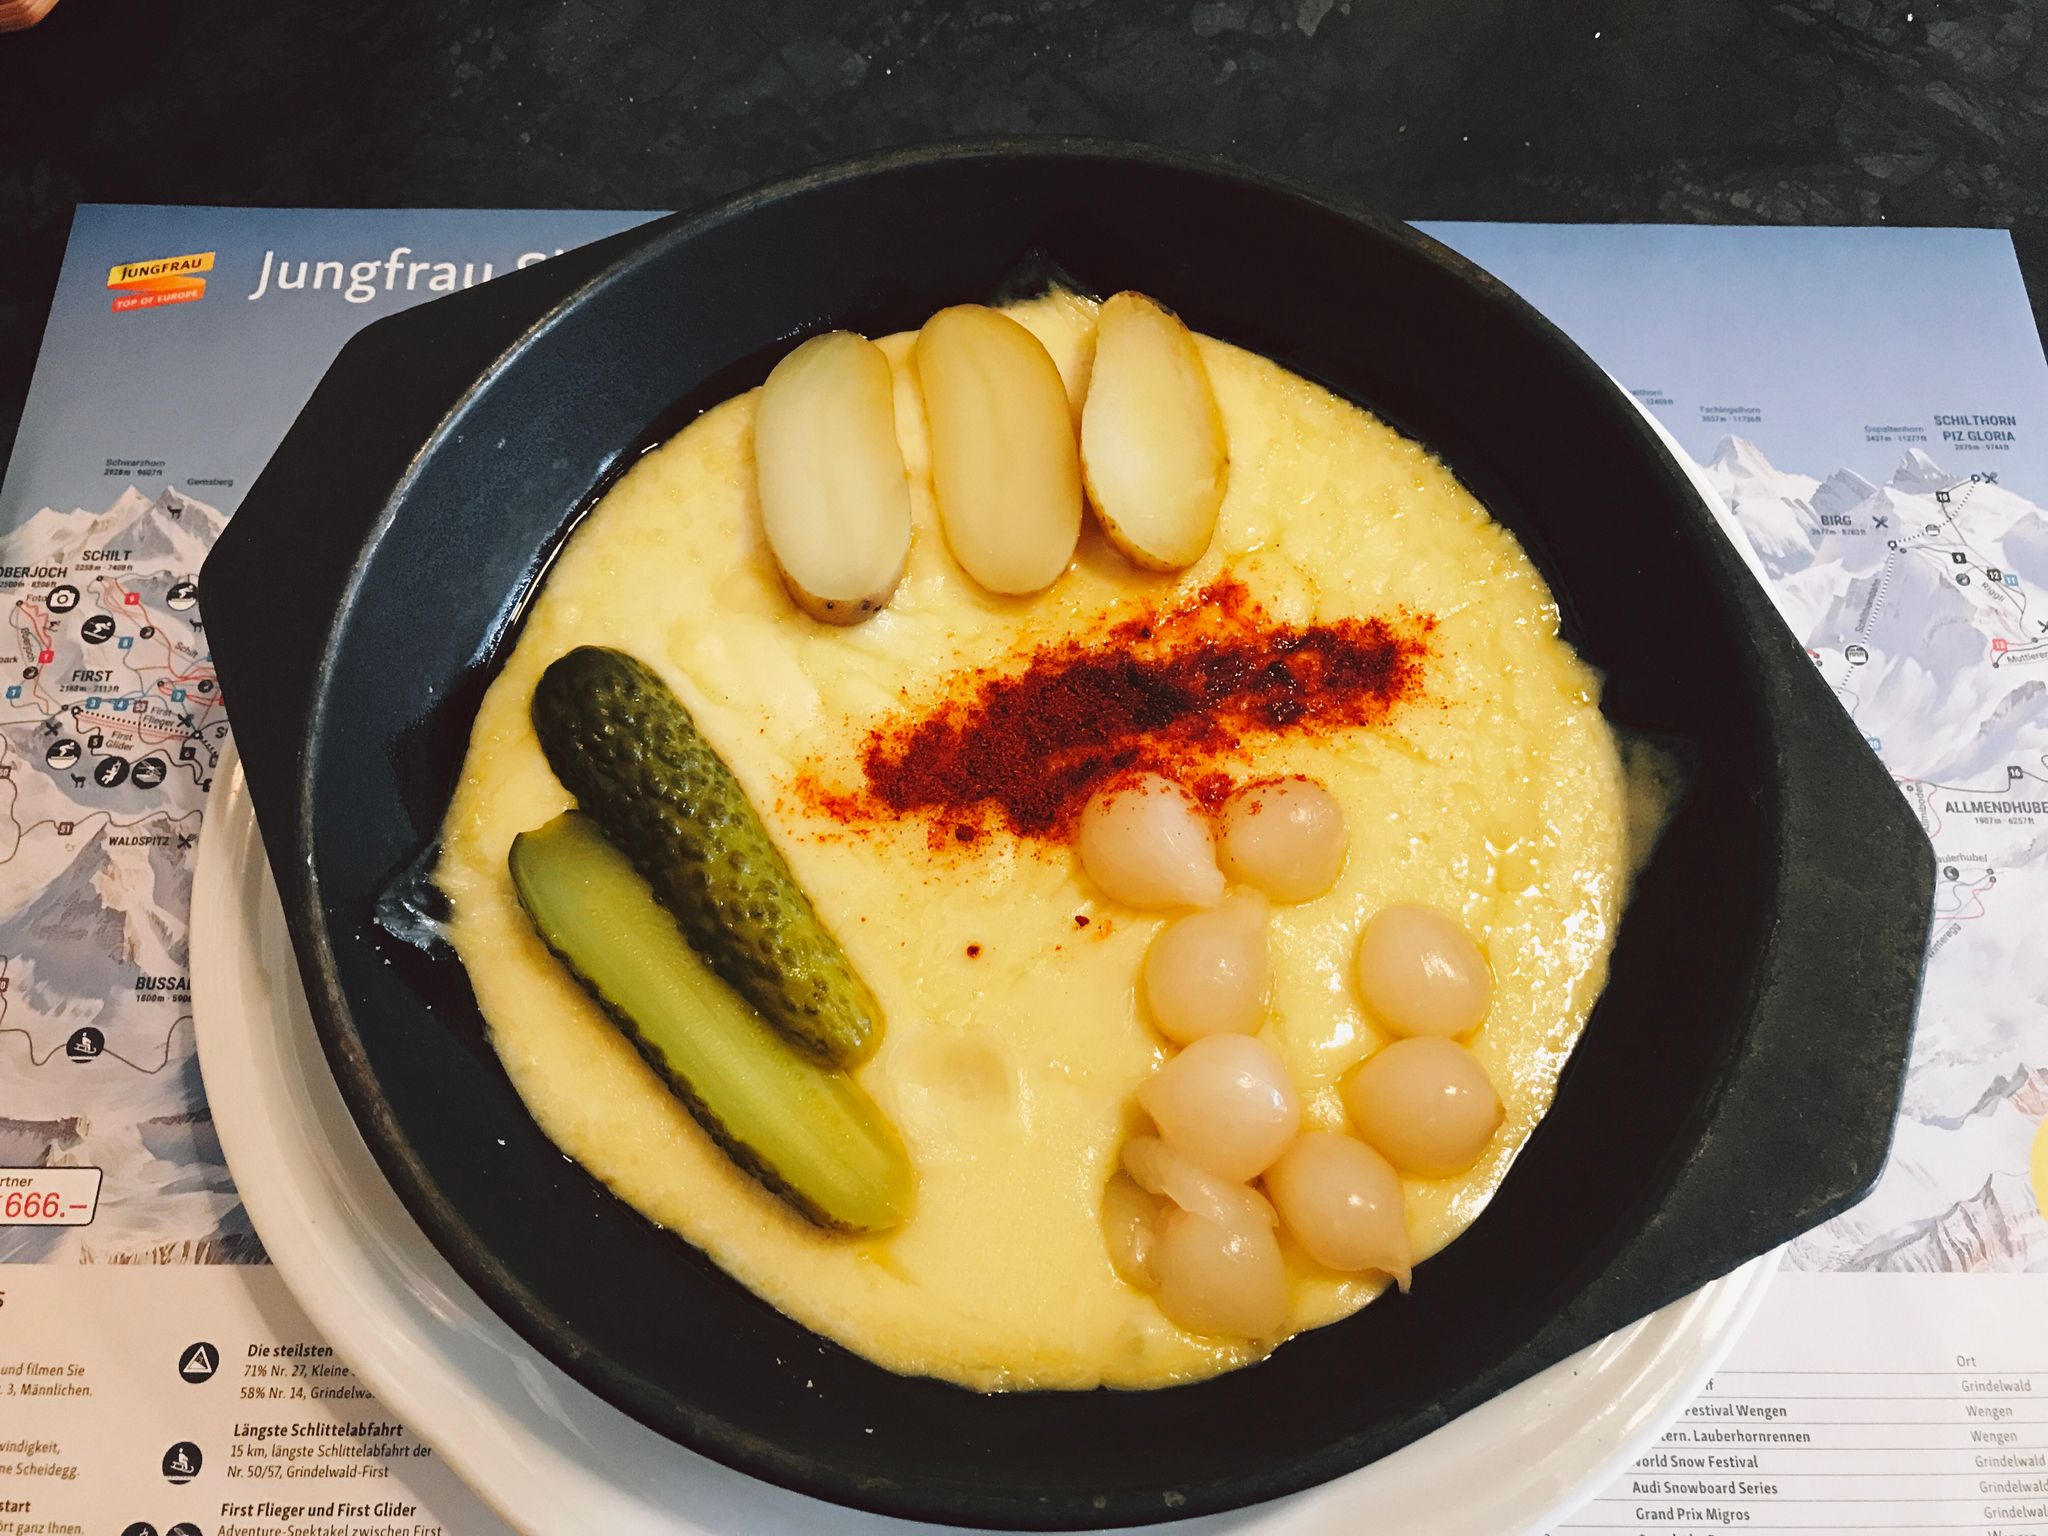 A photo of a cast-iron dish with the bottom covered in yellow raclette cheese, with potatoes, cocktail onions, and pickles on top.